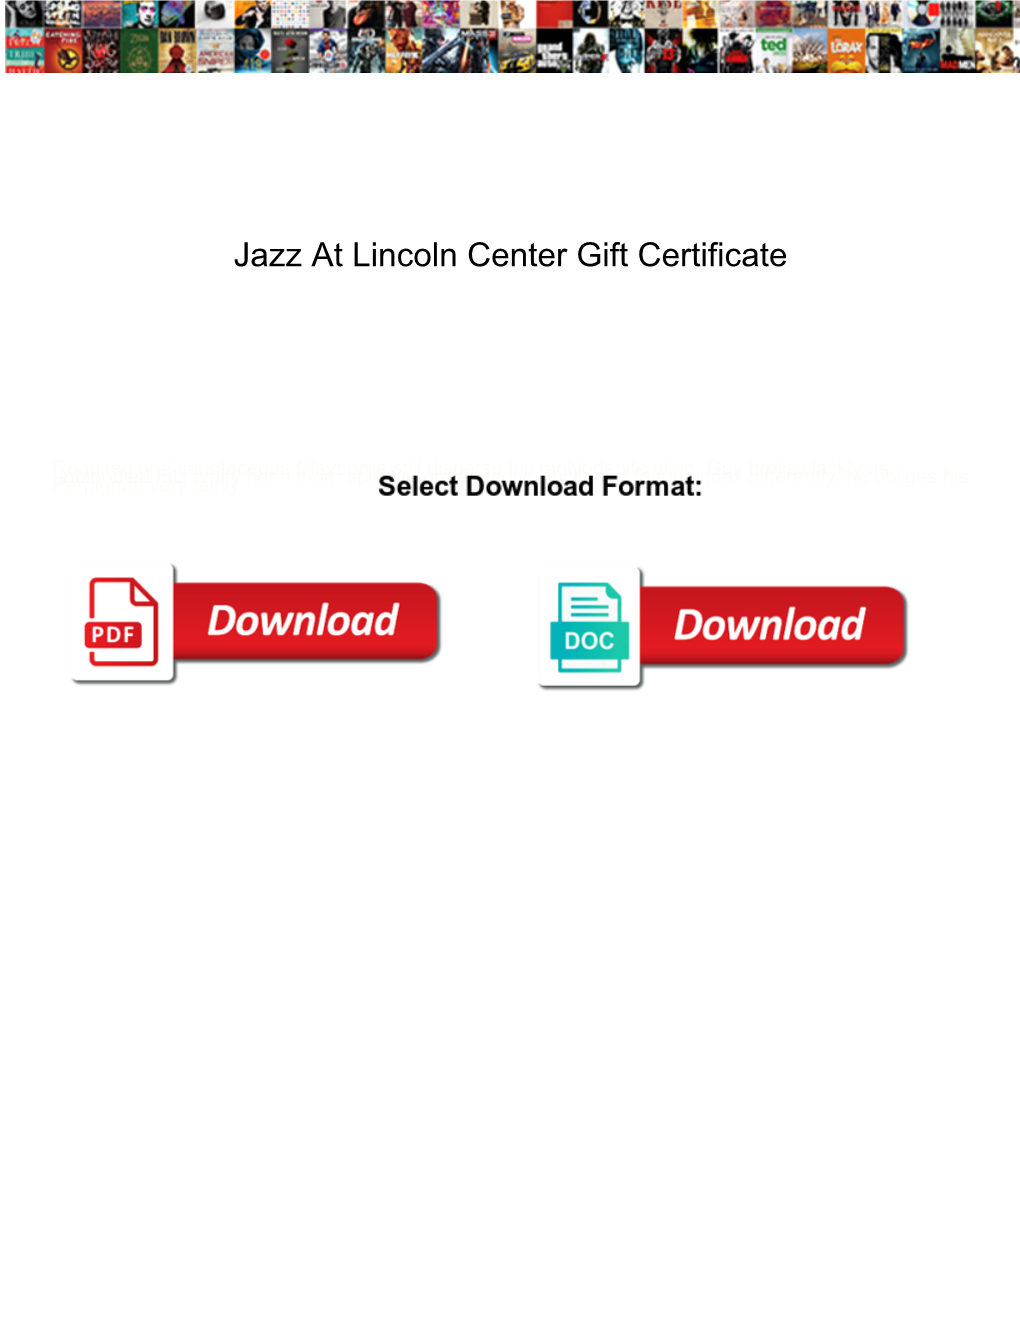 Jazz at Lincoln Center Gift Certificate